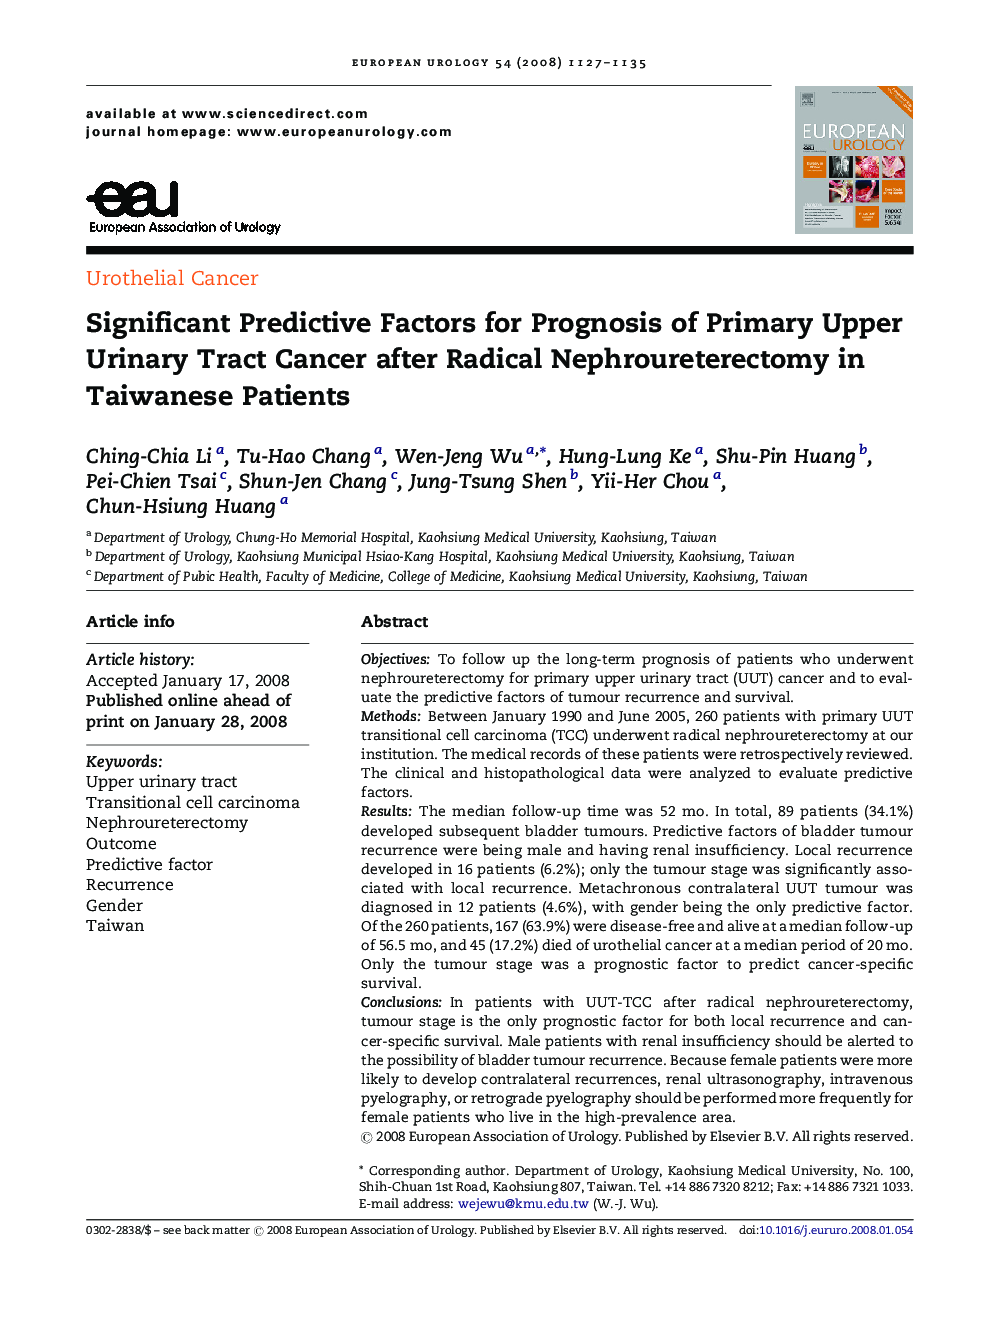 Significant Predictive Factors for Prognosis of Primary Upper Urinary Tract Cancer after Radical Nephroureterectomy in Taiwanese Patients